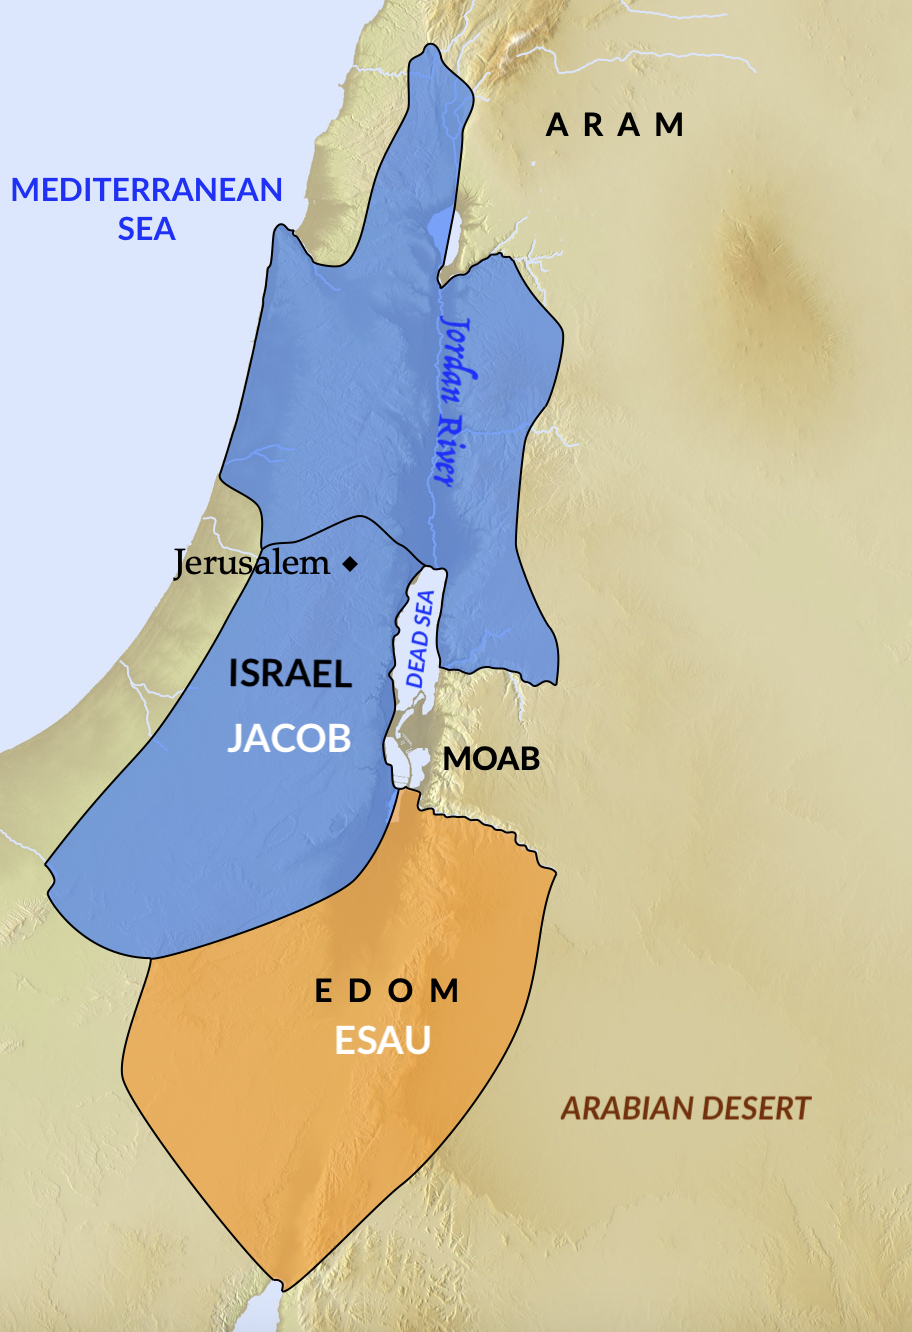 The two countries of Jacob (Israel) and Esau (Edom).